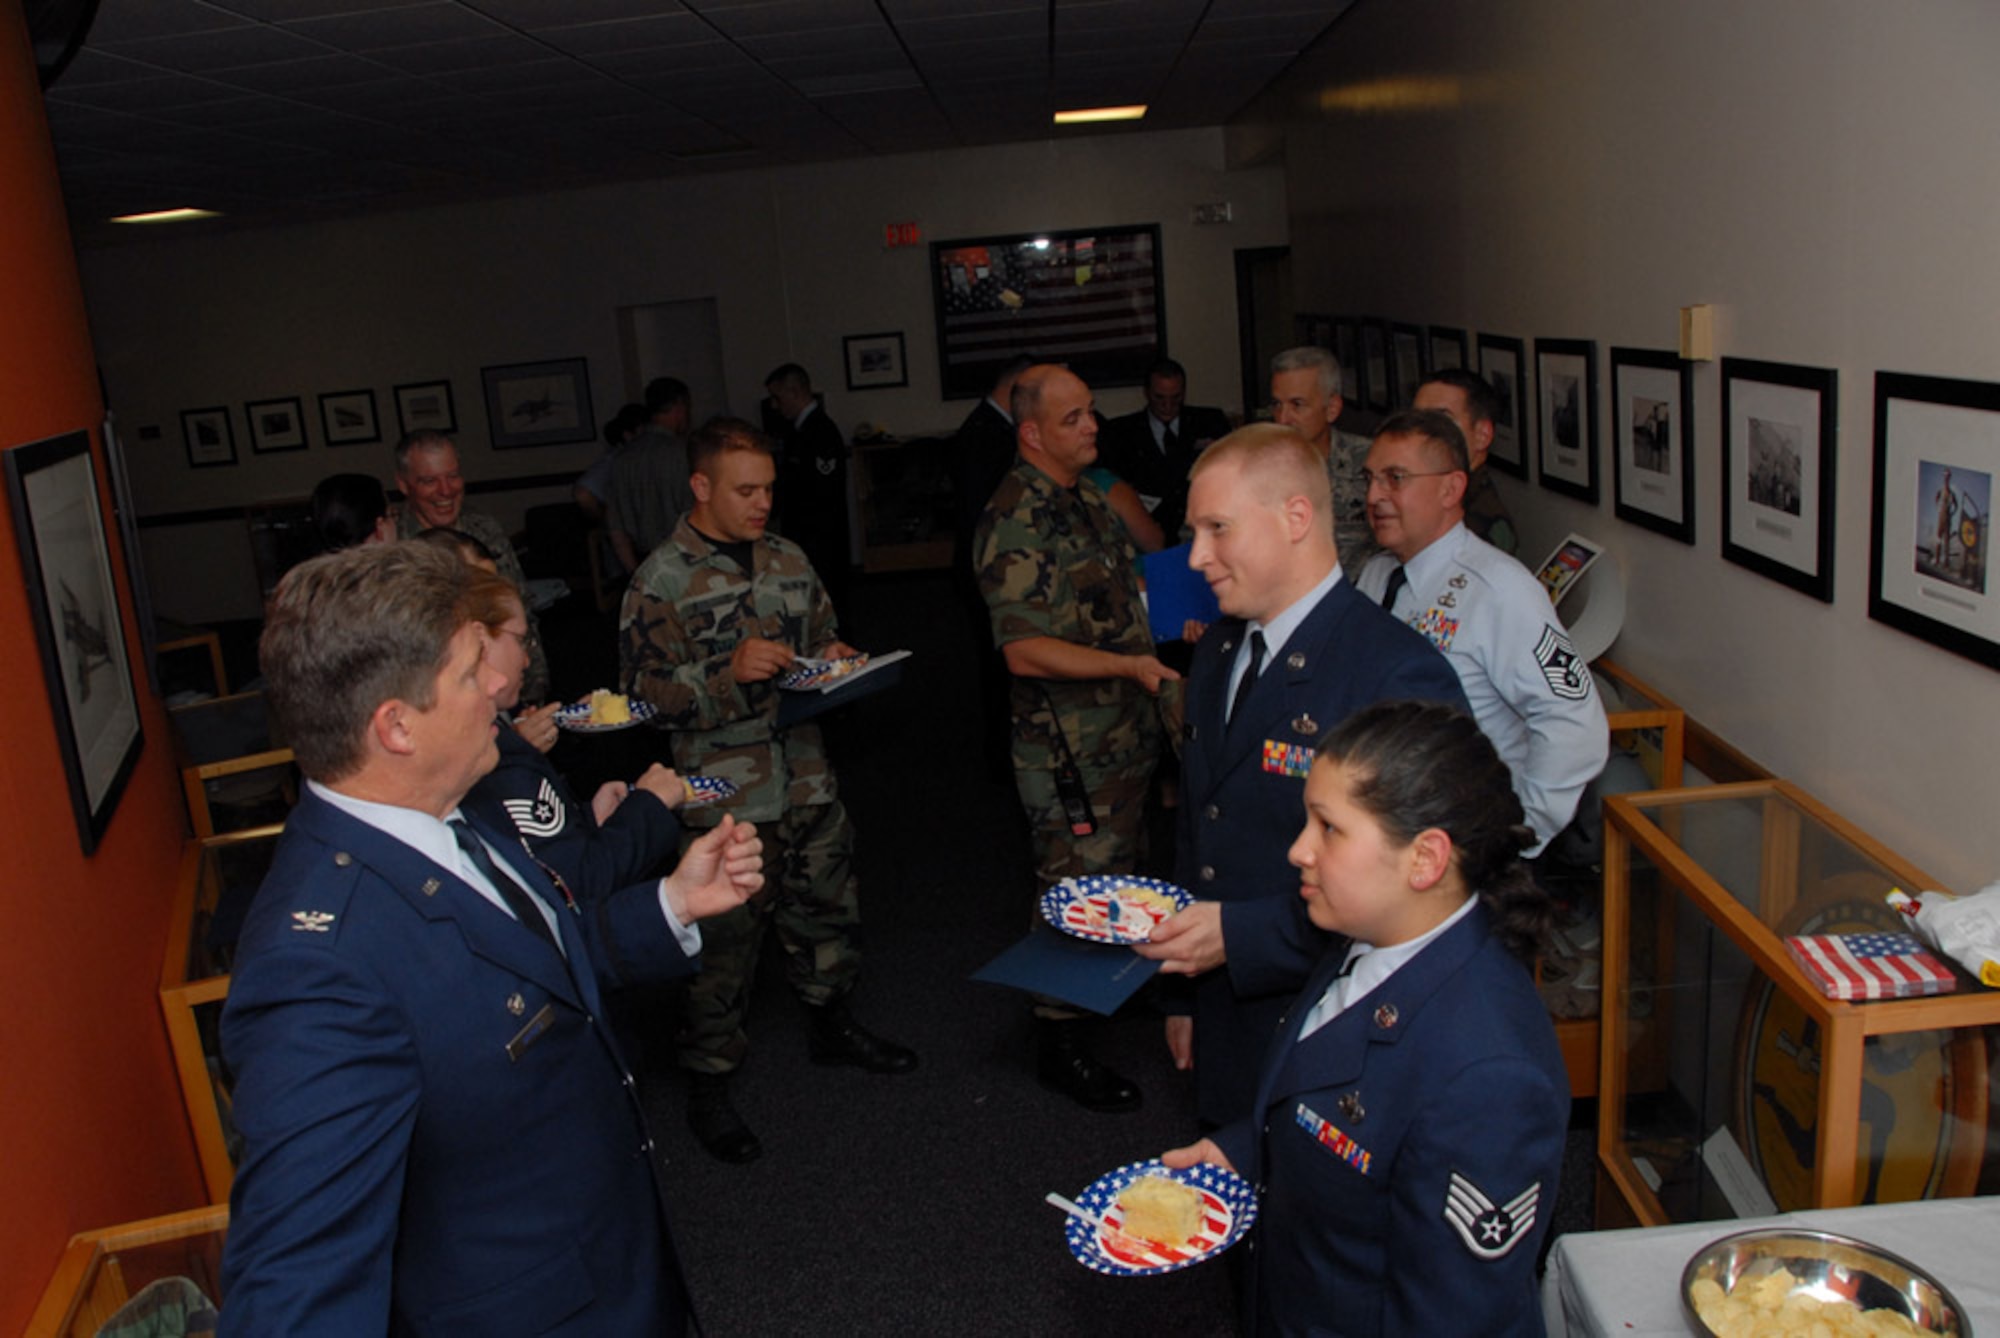 Col. Brian P. Barnes, commander, 103rd Airlift Wing, (left) chats with Community College of the Air Force graduates at a reception following the graduation ceremony at the Connecticut Air National Guard Base, East Granby, Conn. on June 28, 2008.  Col. Barnes was the guest speaker for the event and awarded the CCAF degrees to the graduates.  (U.S. Air Force Photo by Staff Sgt. Nicholas A. McCorkle)